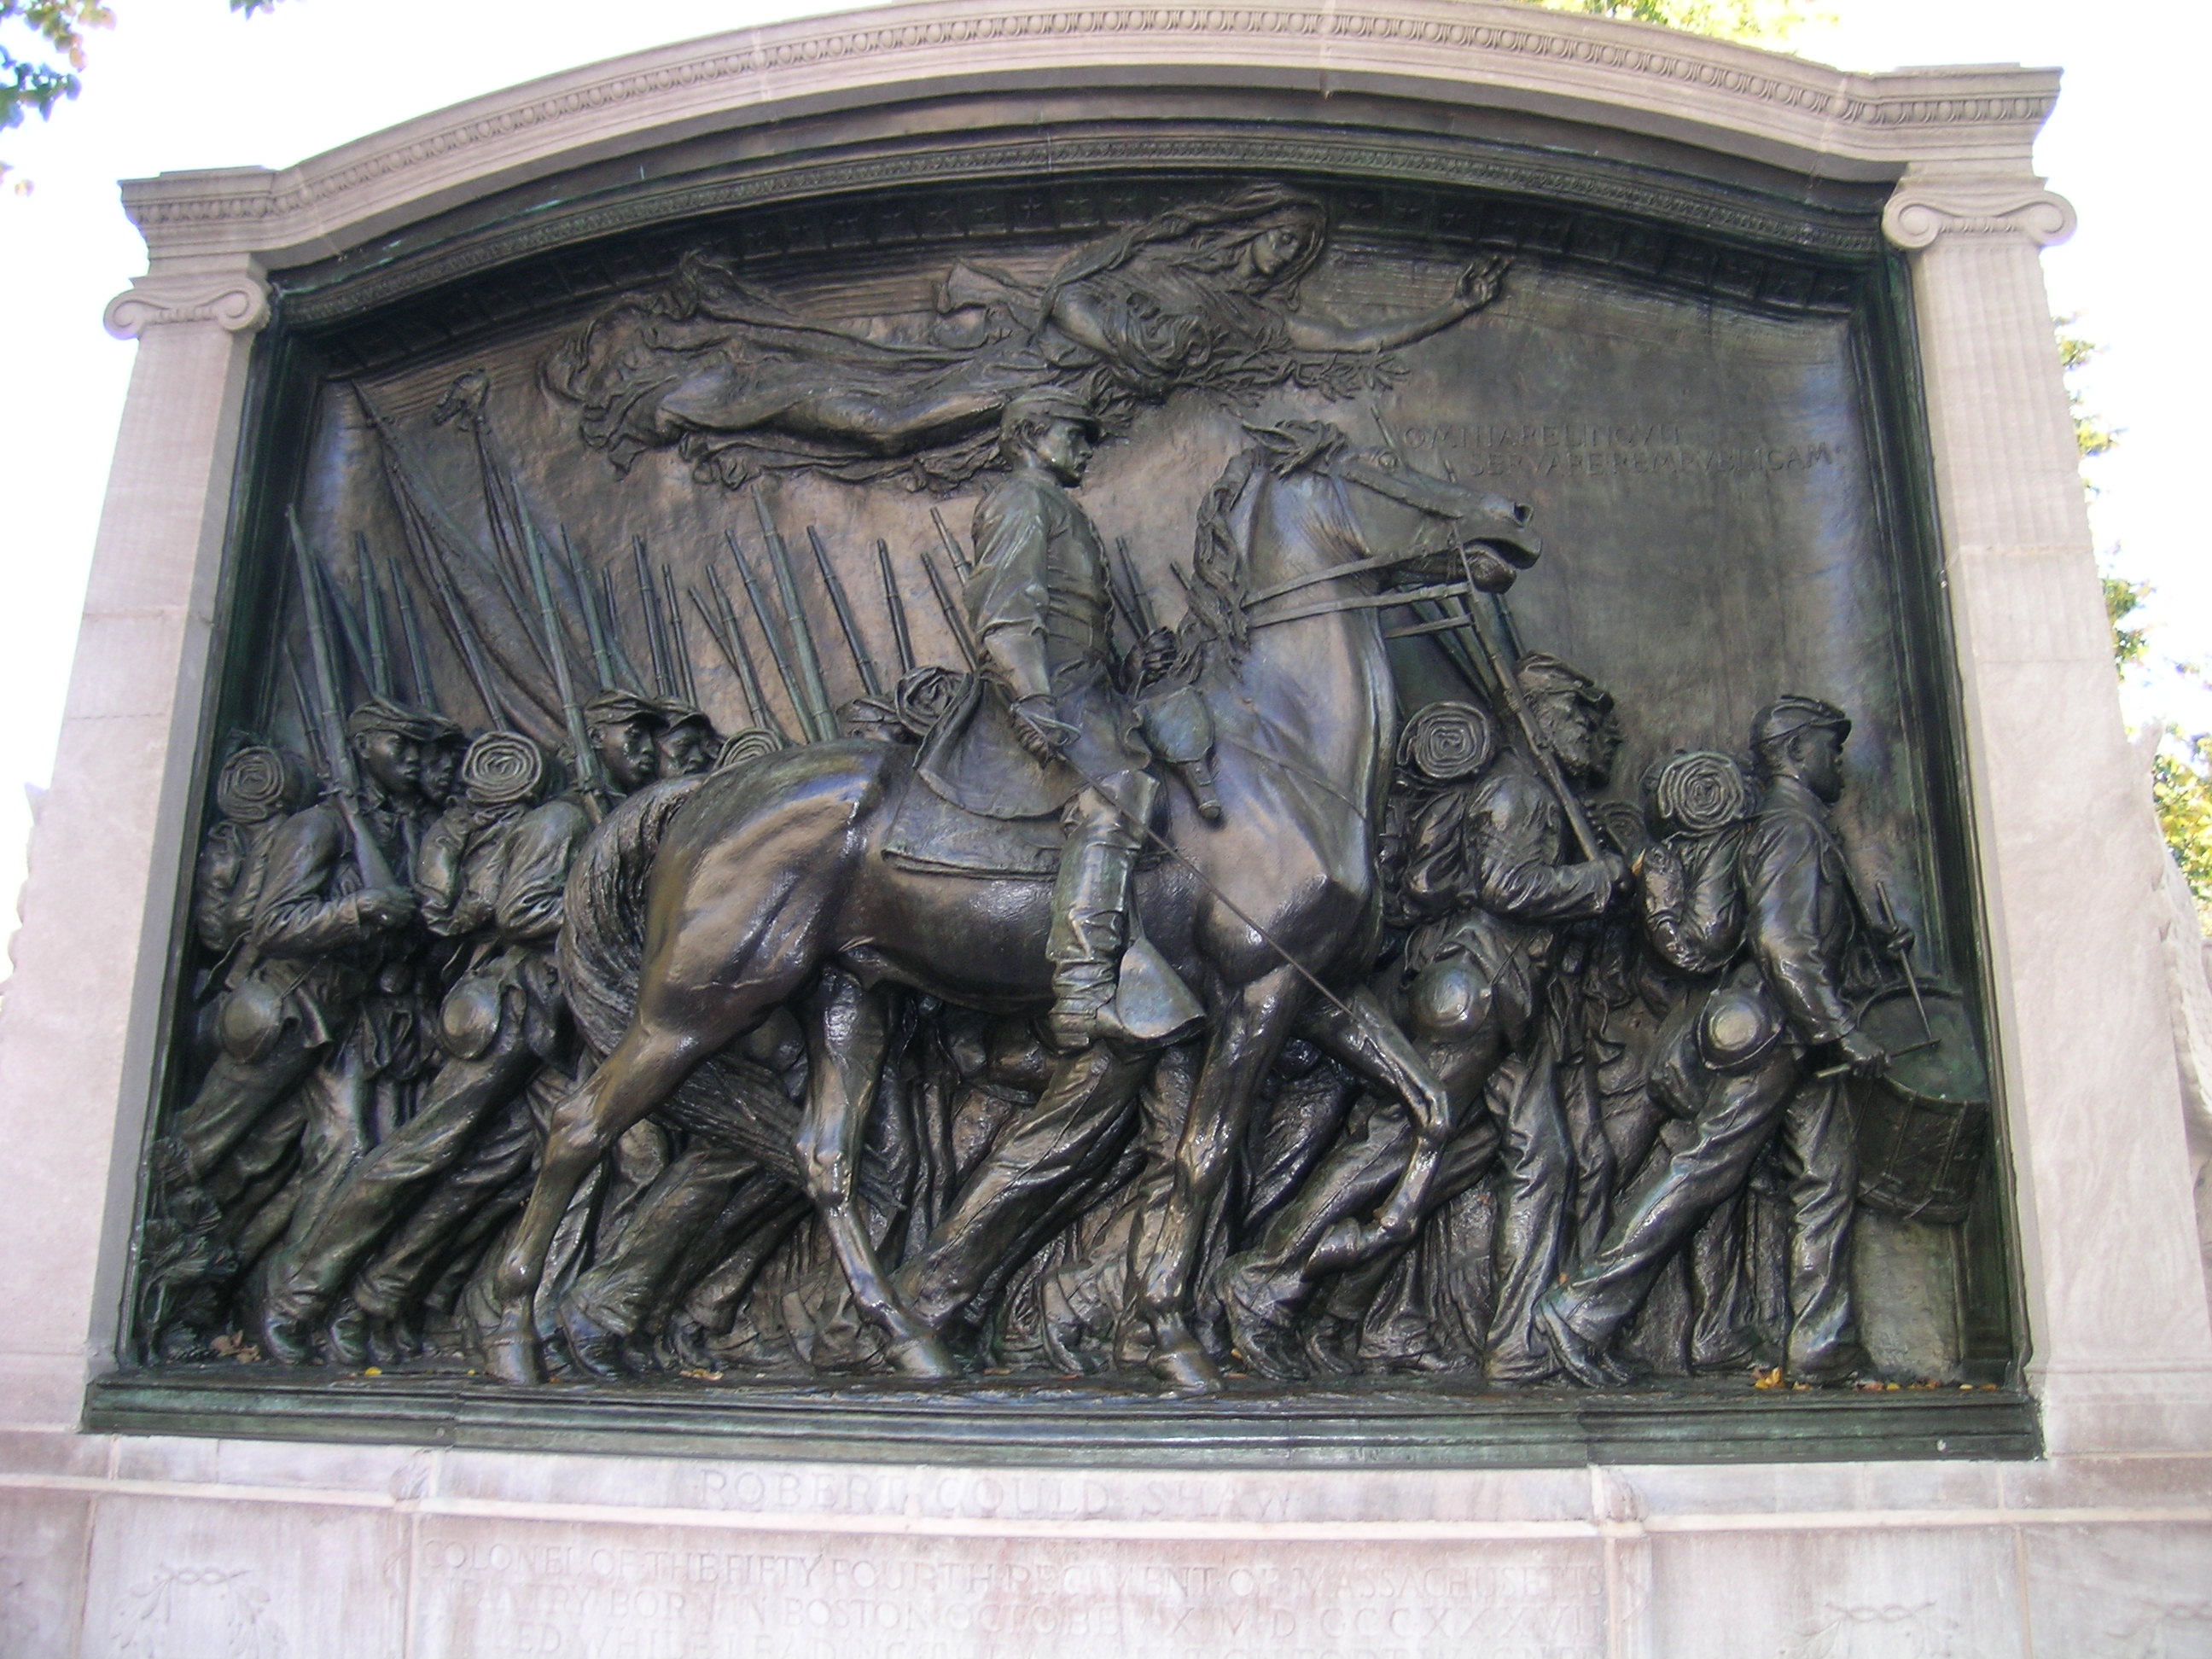 A large bronze statue showing a man on horseback and soldiers walking alongside him